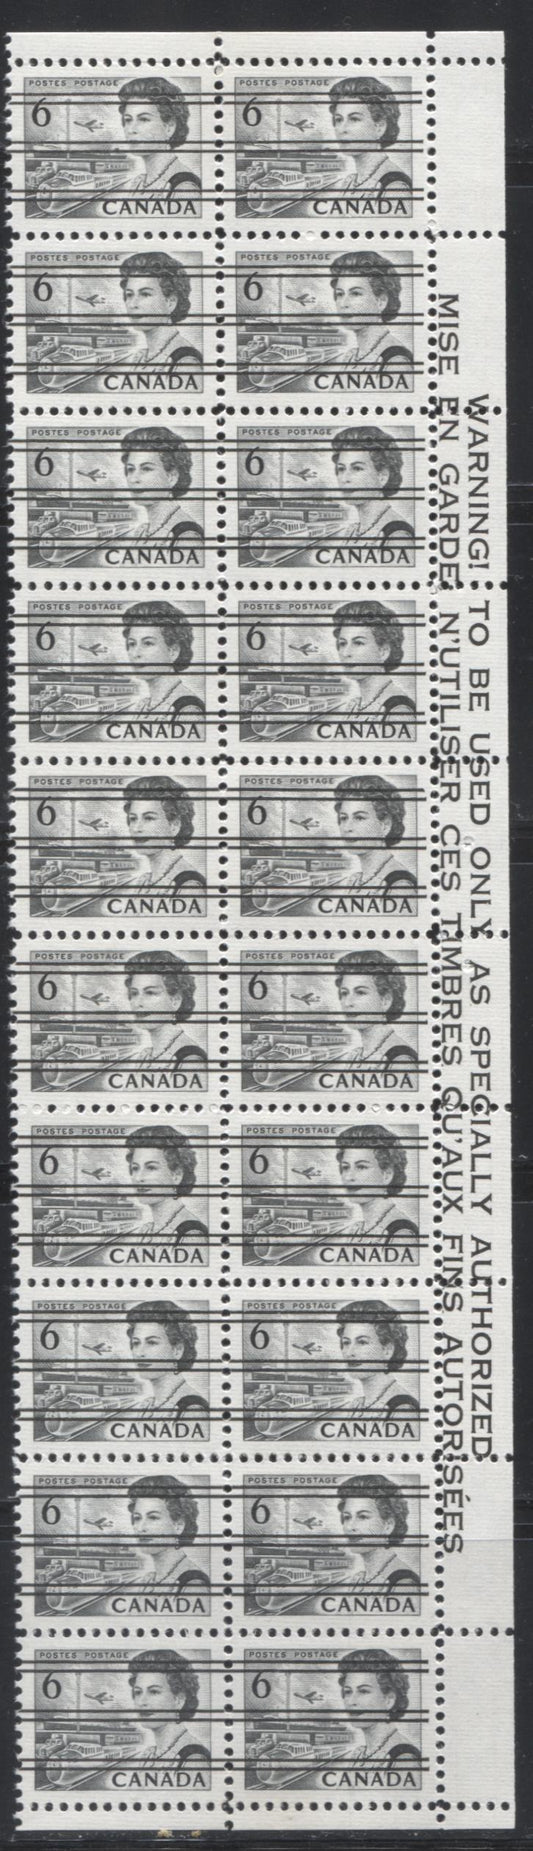 Lot 90 Canada #460fxxi 6c Black Queen Elizabeth II, 1967-1973 Centennial Issue, A VFNH Right Precancelled Warning Strip Of 20 On LF Ribbed Paper With PVA Gum, Perf 12, Die 1a